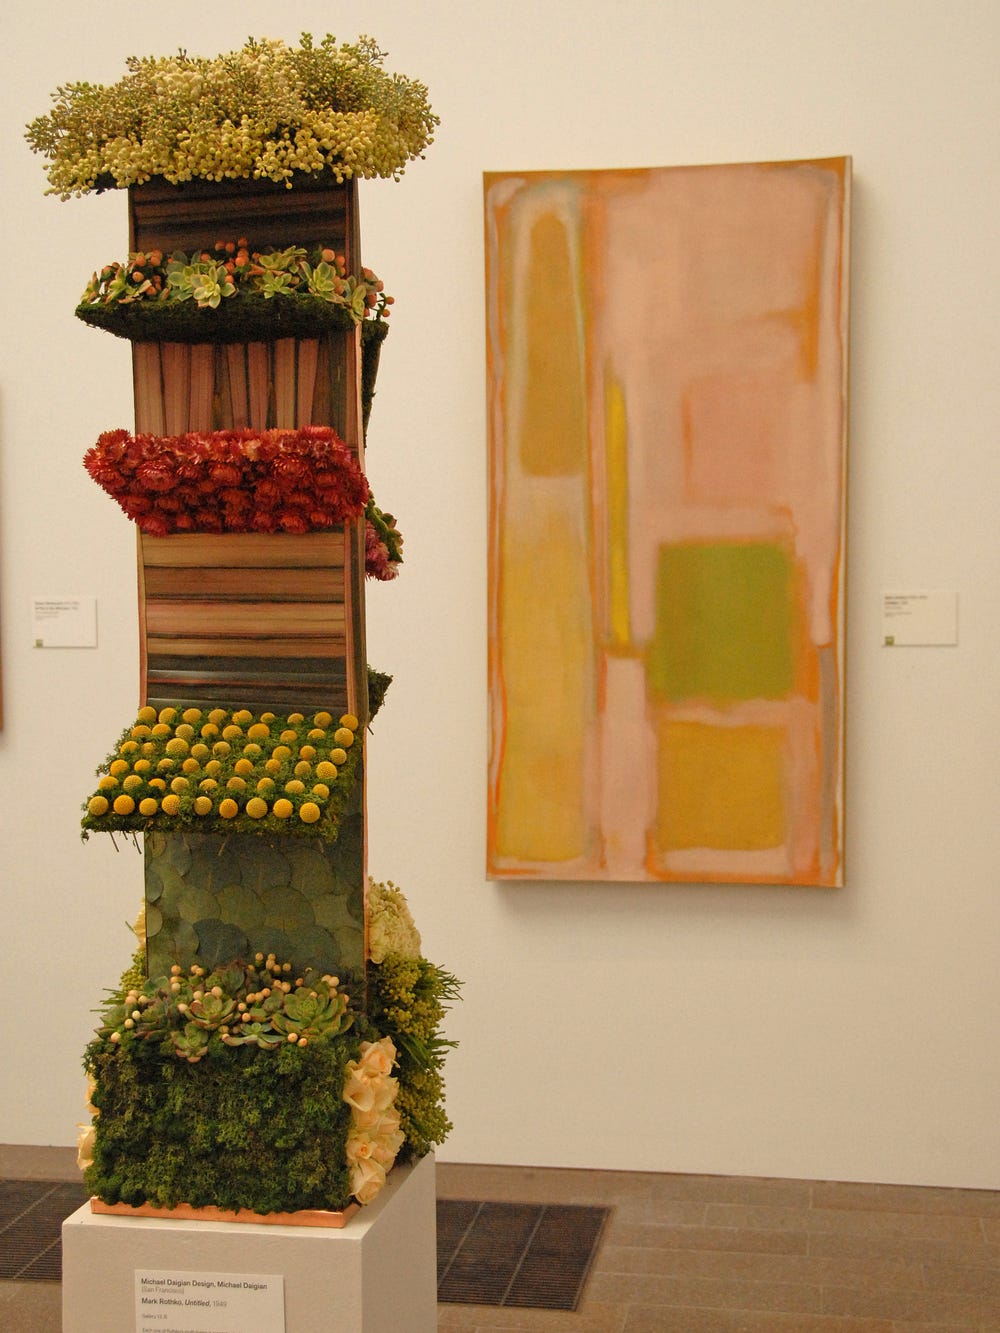 Photograph of green, brown and red floral arrangement in style of painting in background.